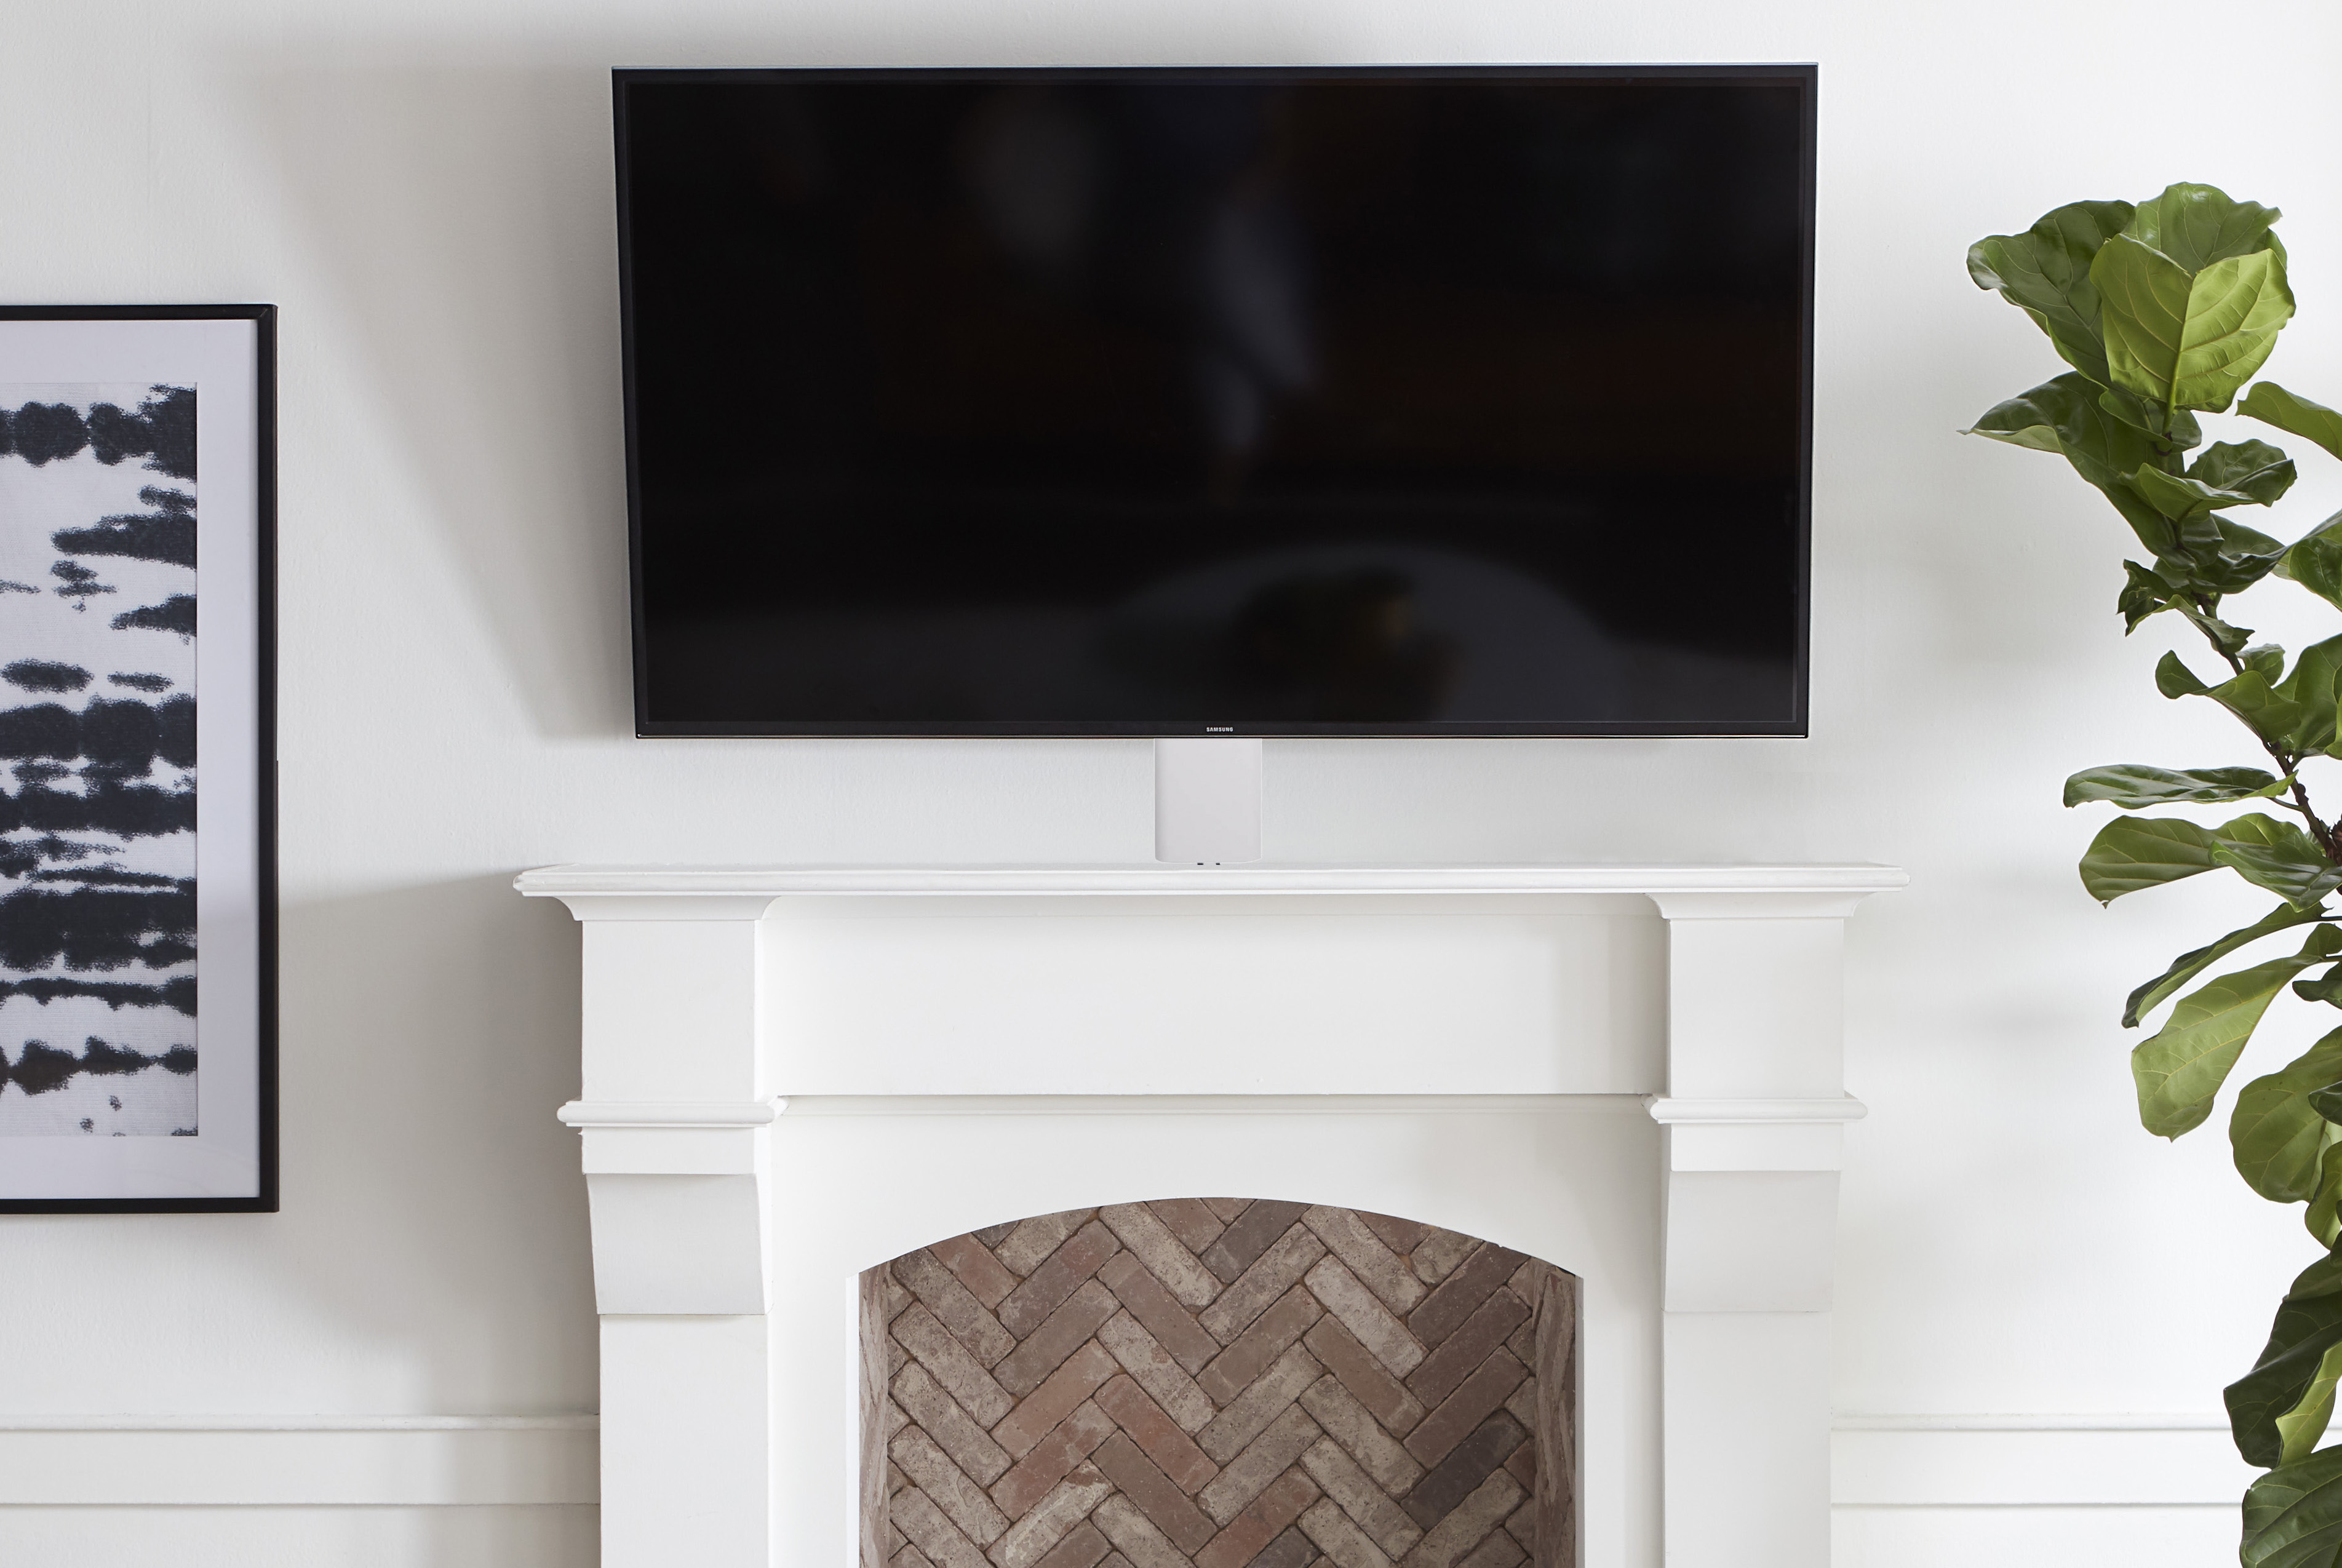 Mounting A Tv Over Fireplace How, How To Mount Flat Screen Tv Above Gas Fireplace